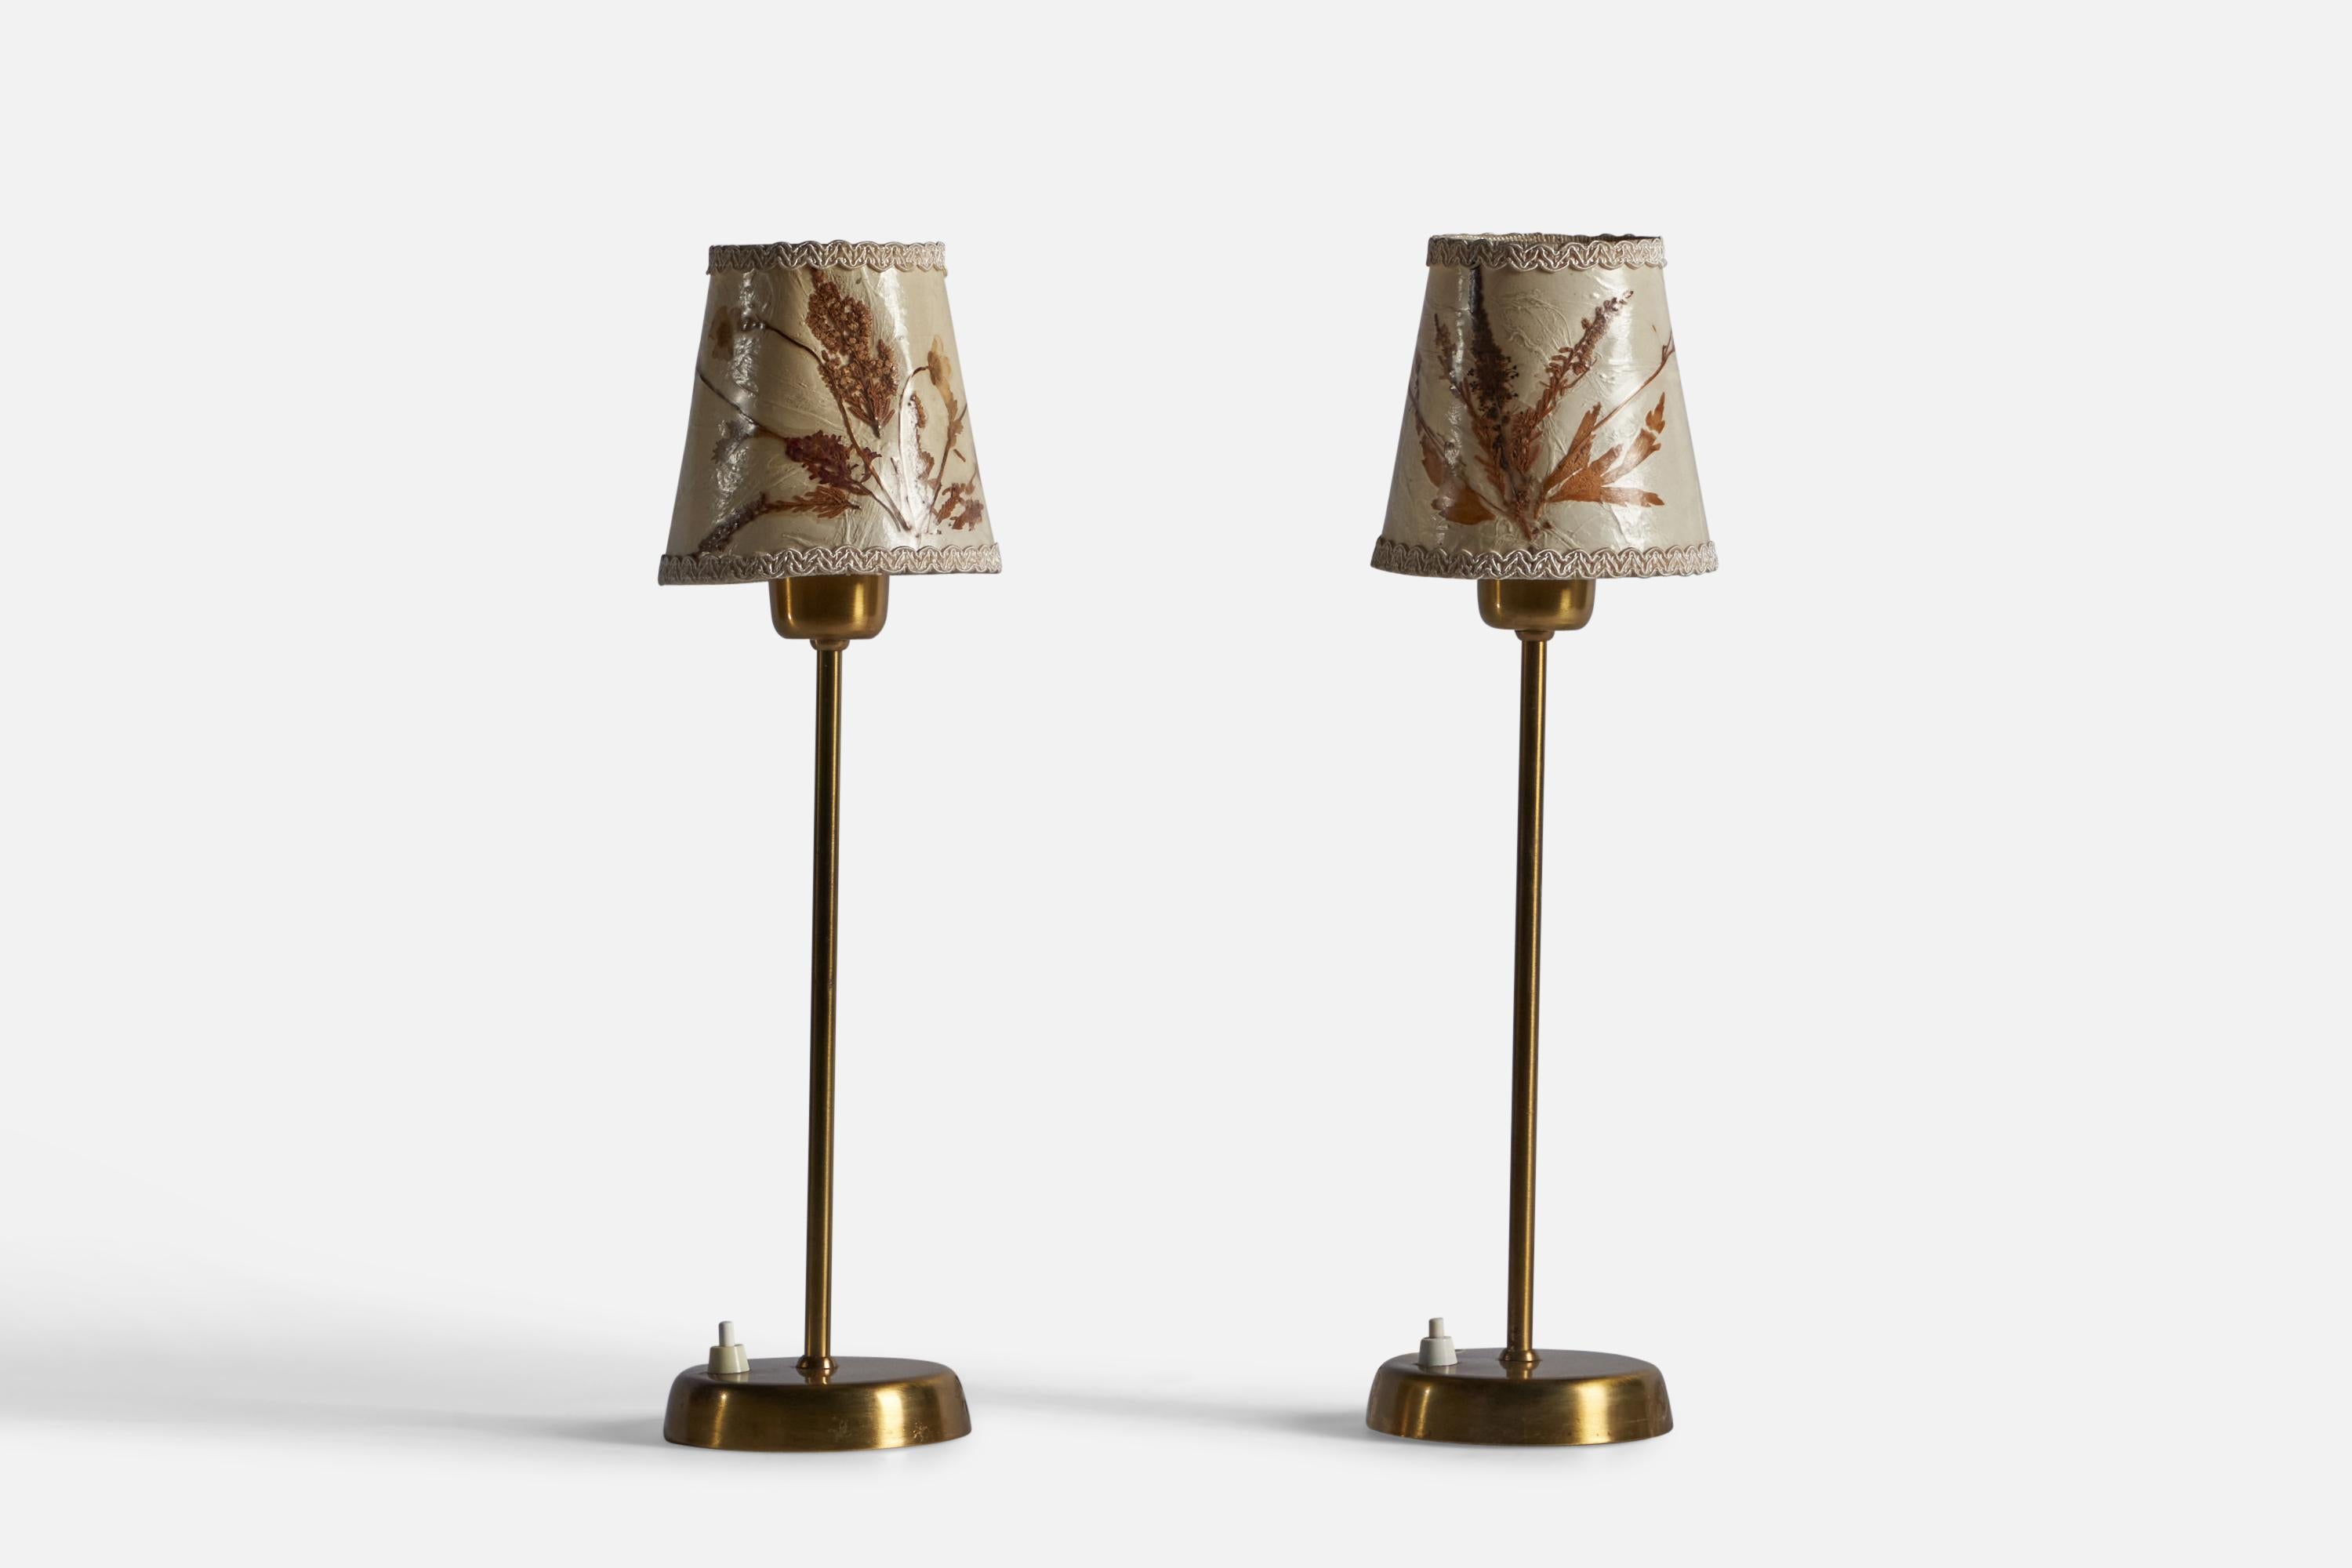 A pair of brass and paper table lamps, designed and produced by Tyringe Konsthantverk, Sweden, c. 1950s.

Overall Dimensions: 17